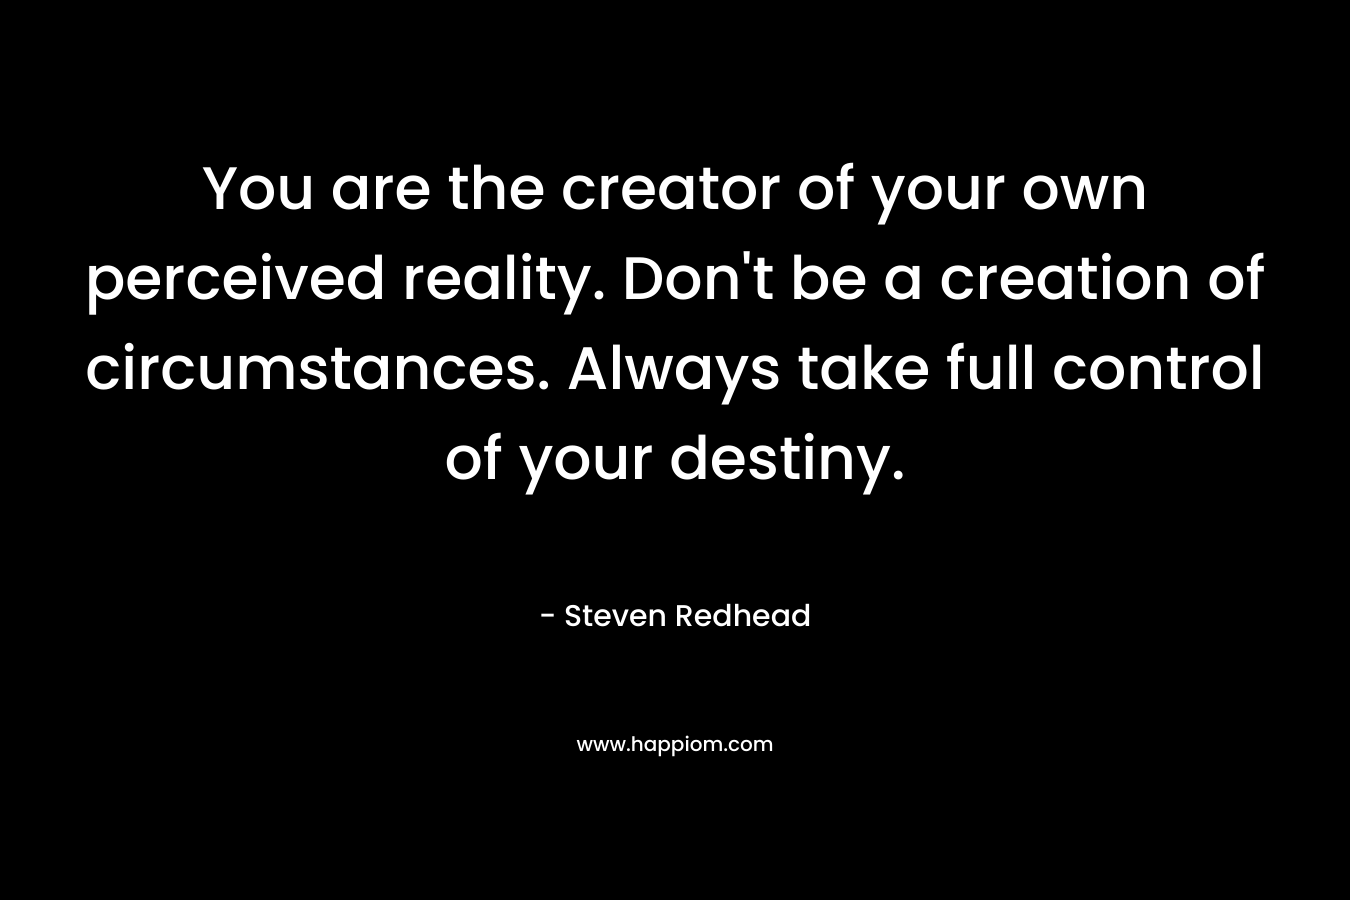 You are the creator of your own perceived reality. Don't be a creation of circumstances. Always take full control of your destiny.